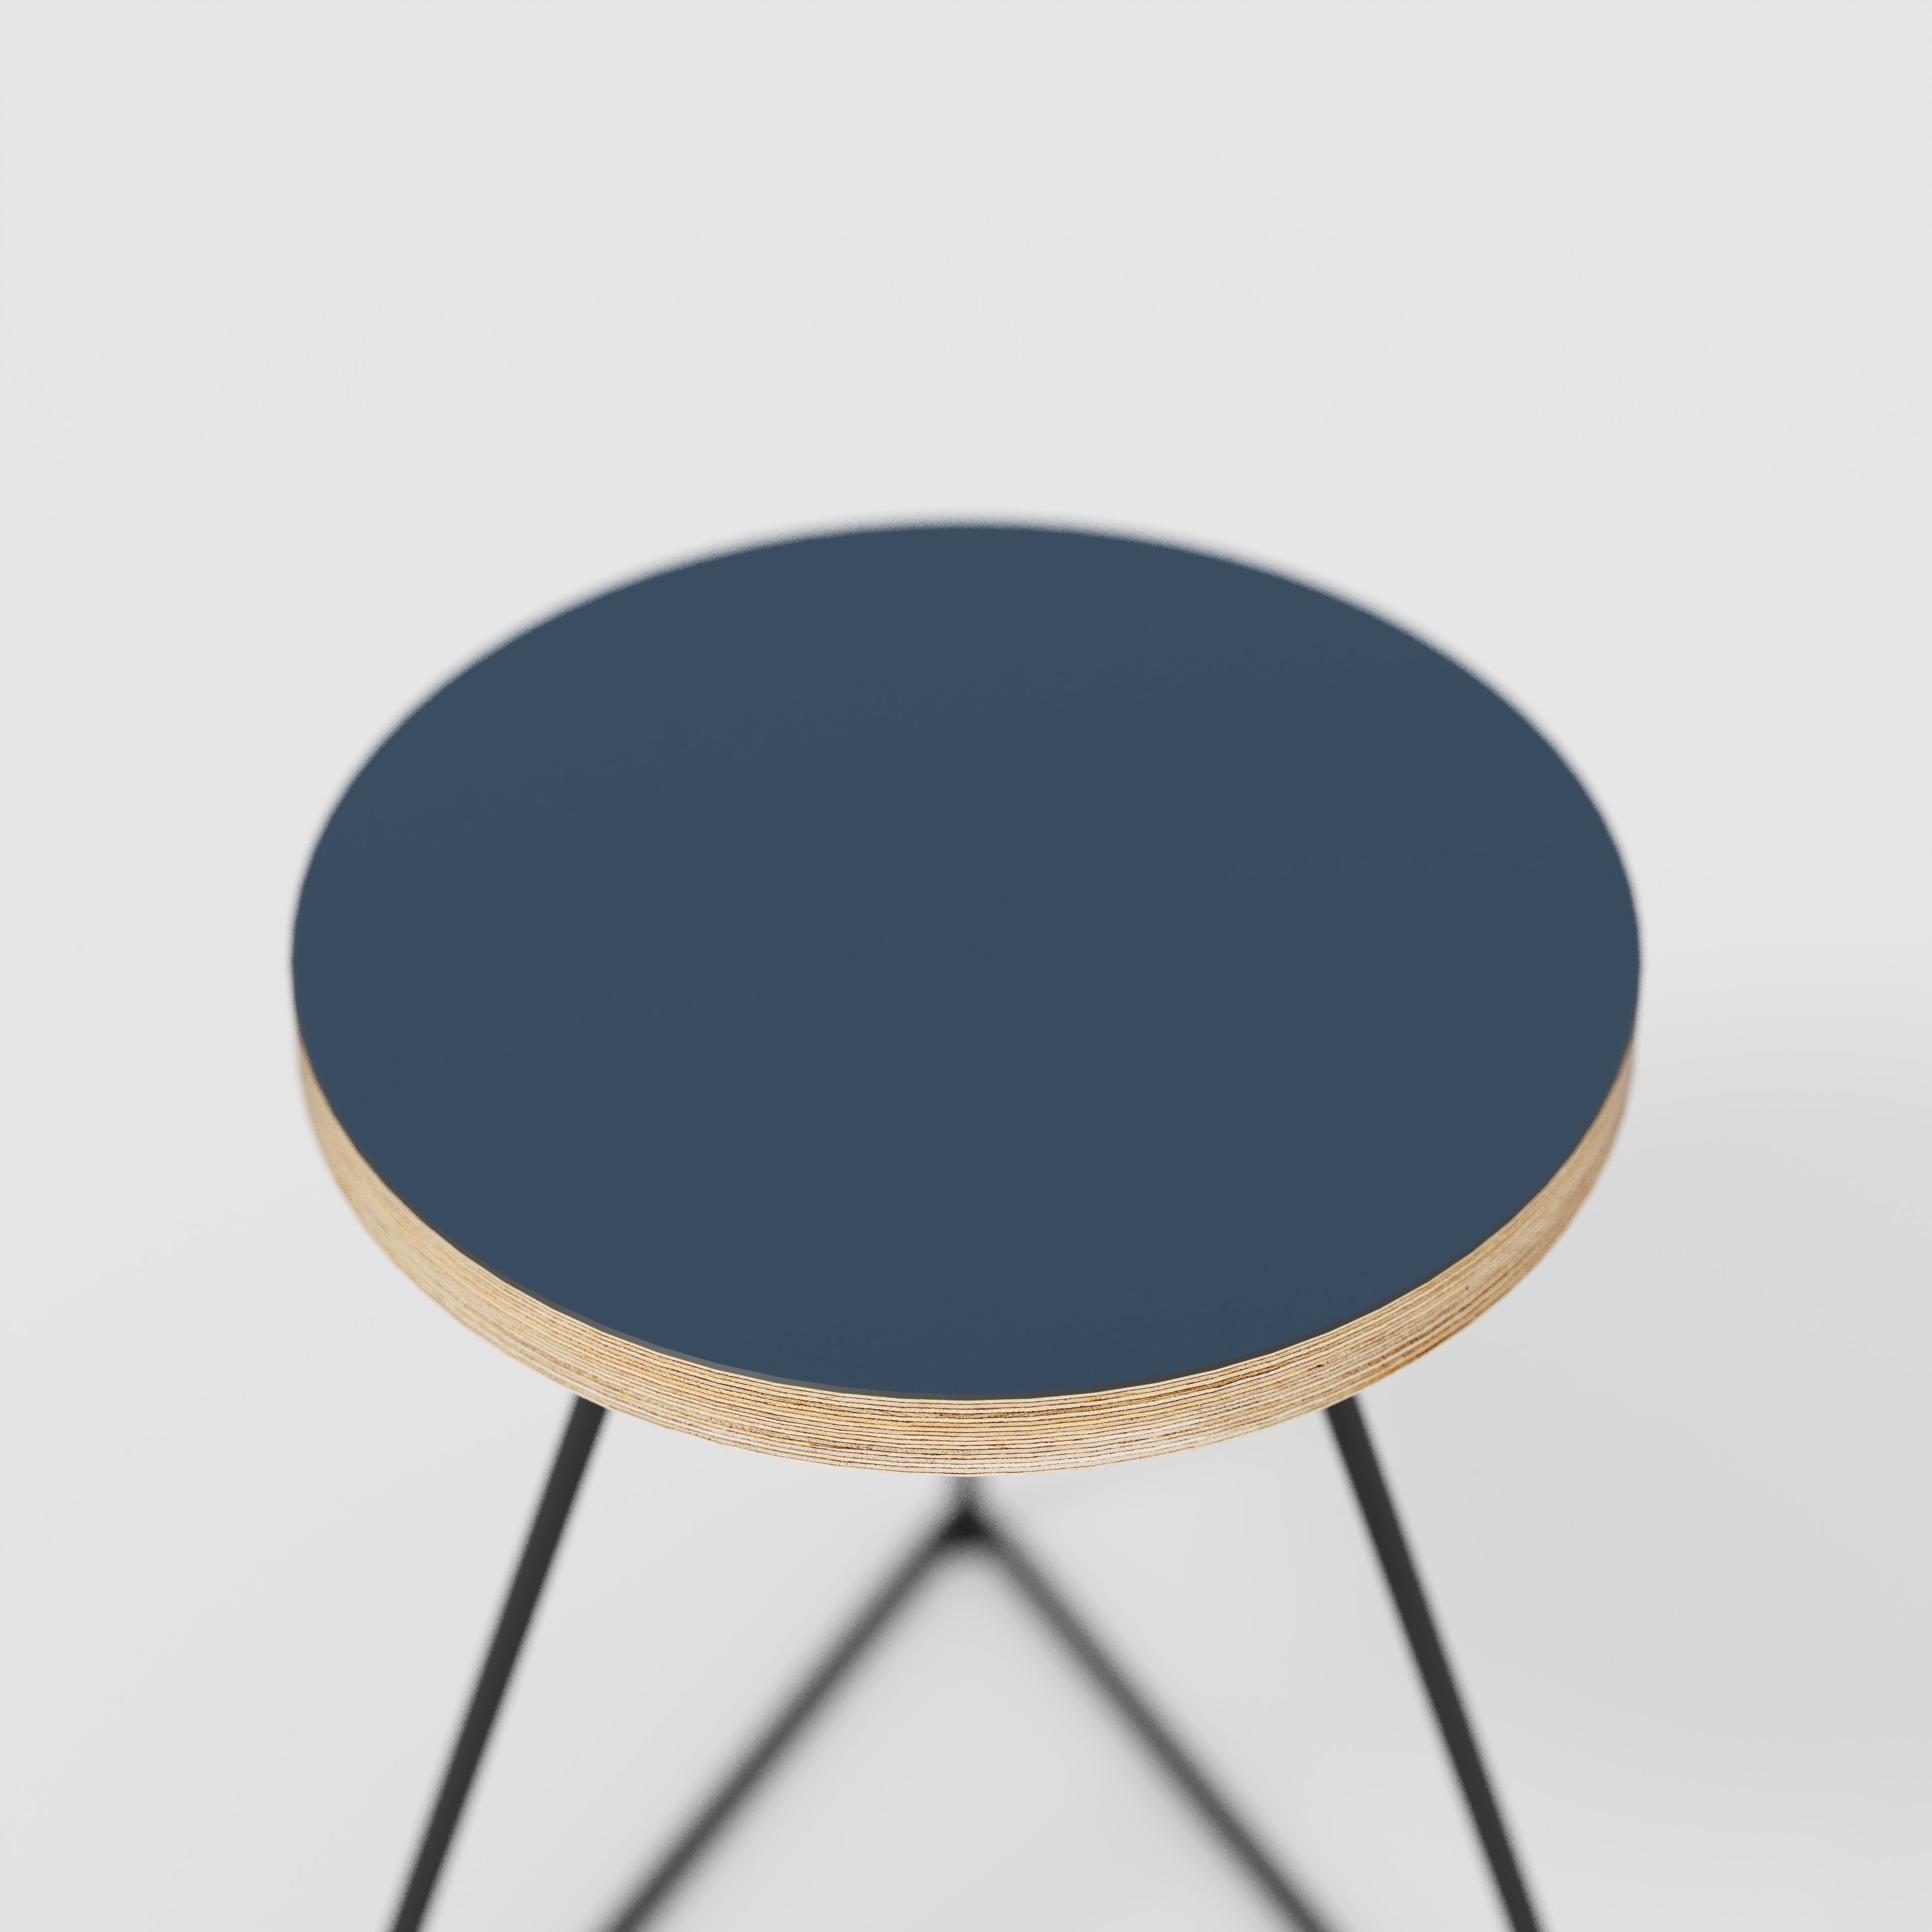 Stool with Black Prism Base - Formica Night Sea Blue